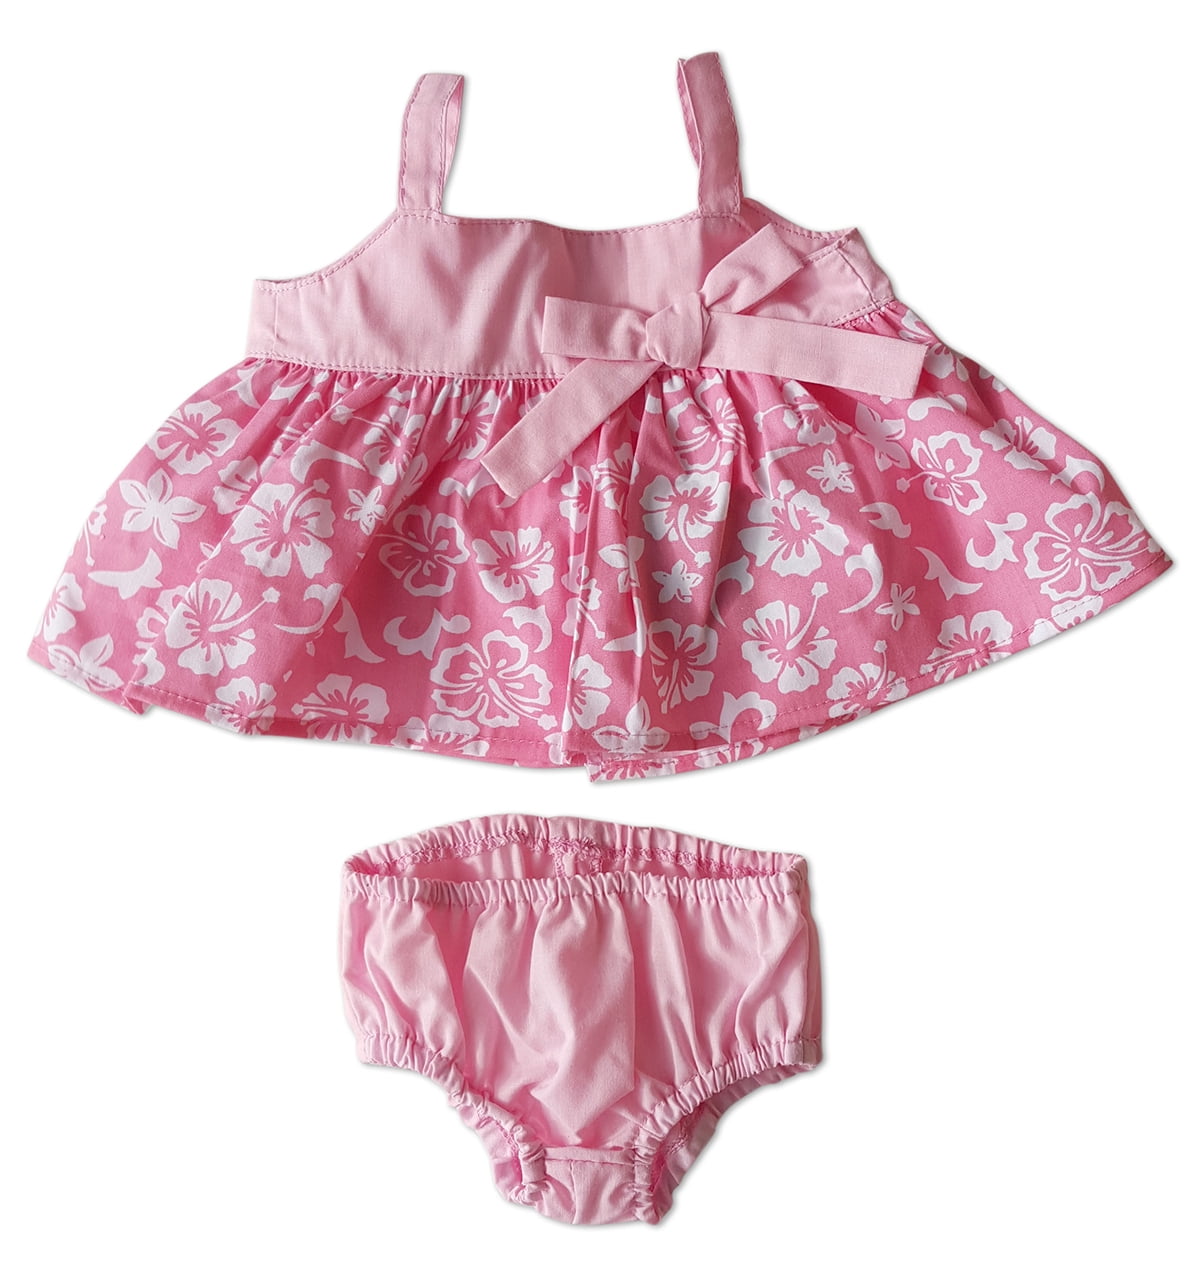 Pink Ballerina Outfit Fits Build A Bear Workshop 12" 16" Teddy Bears Clothes 